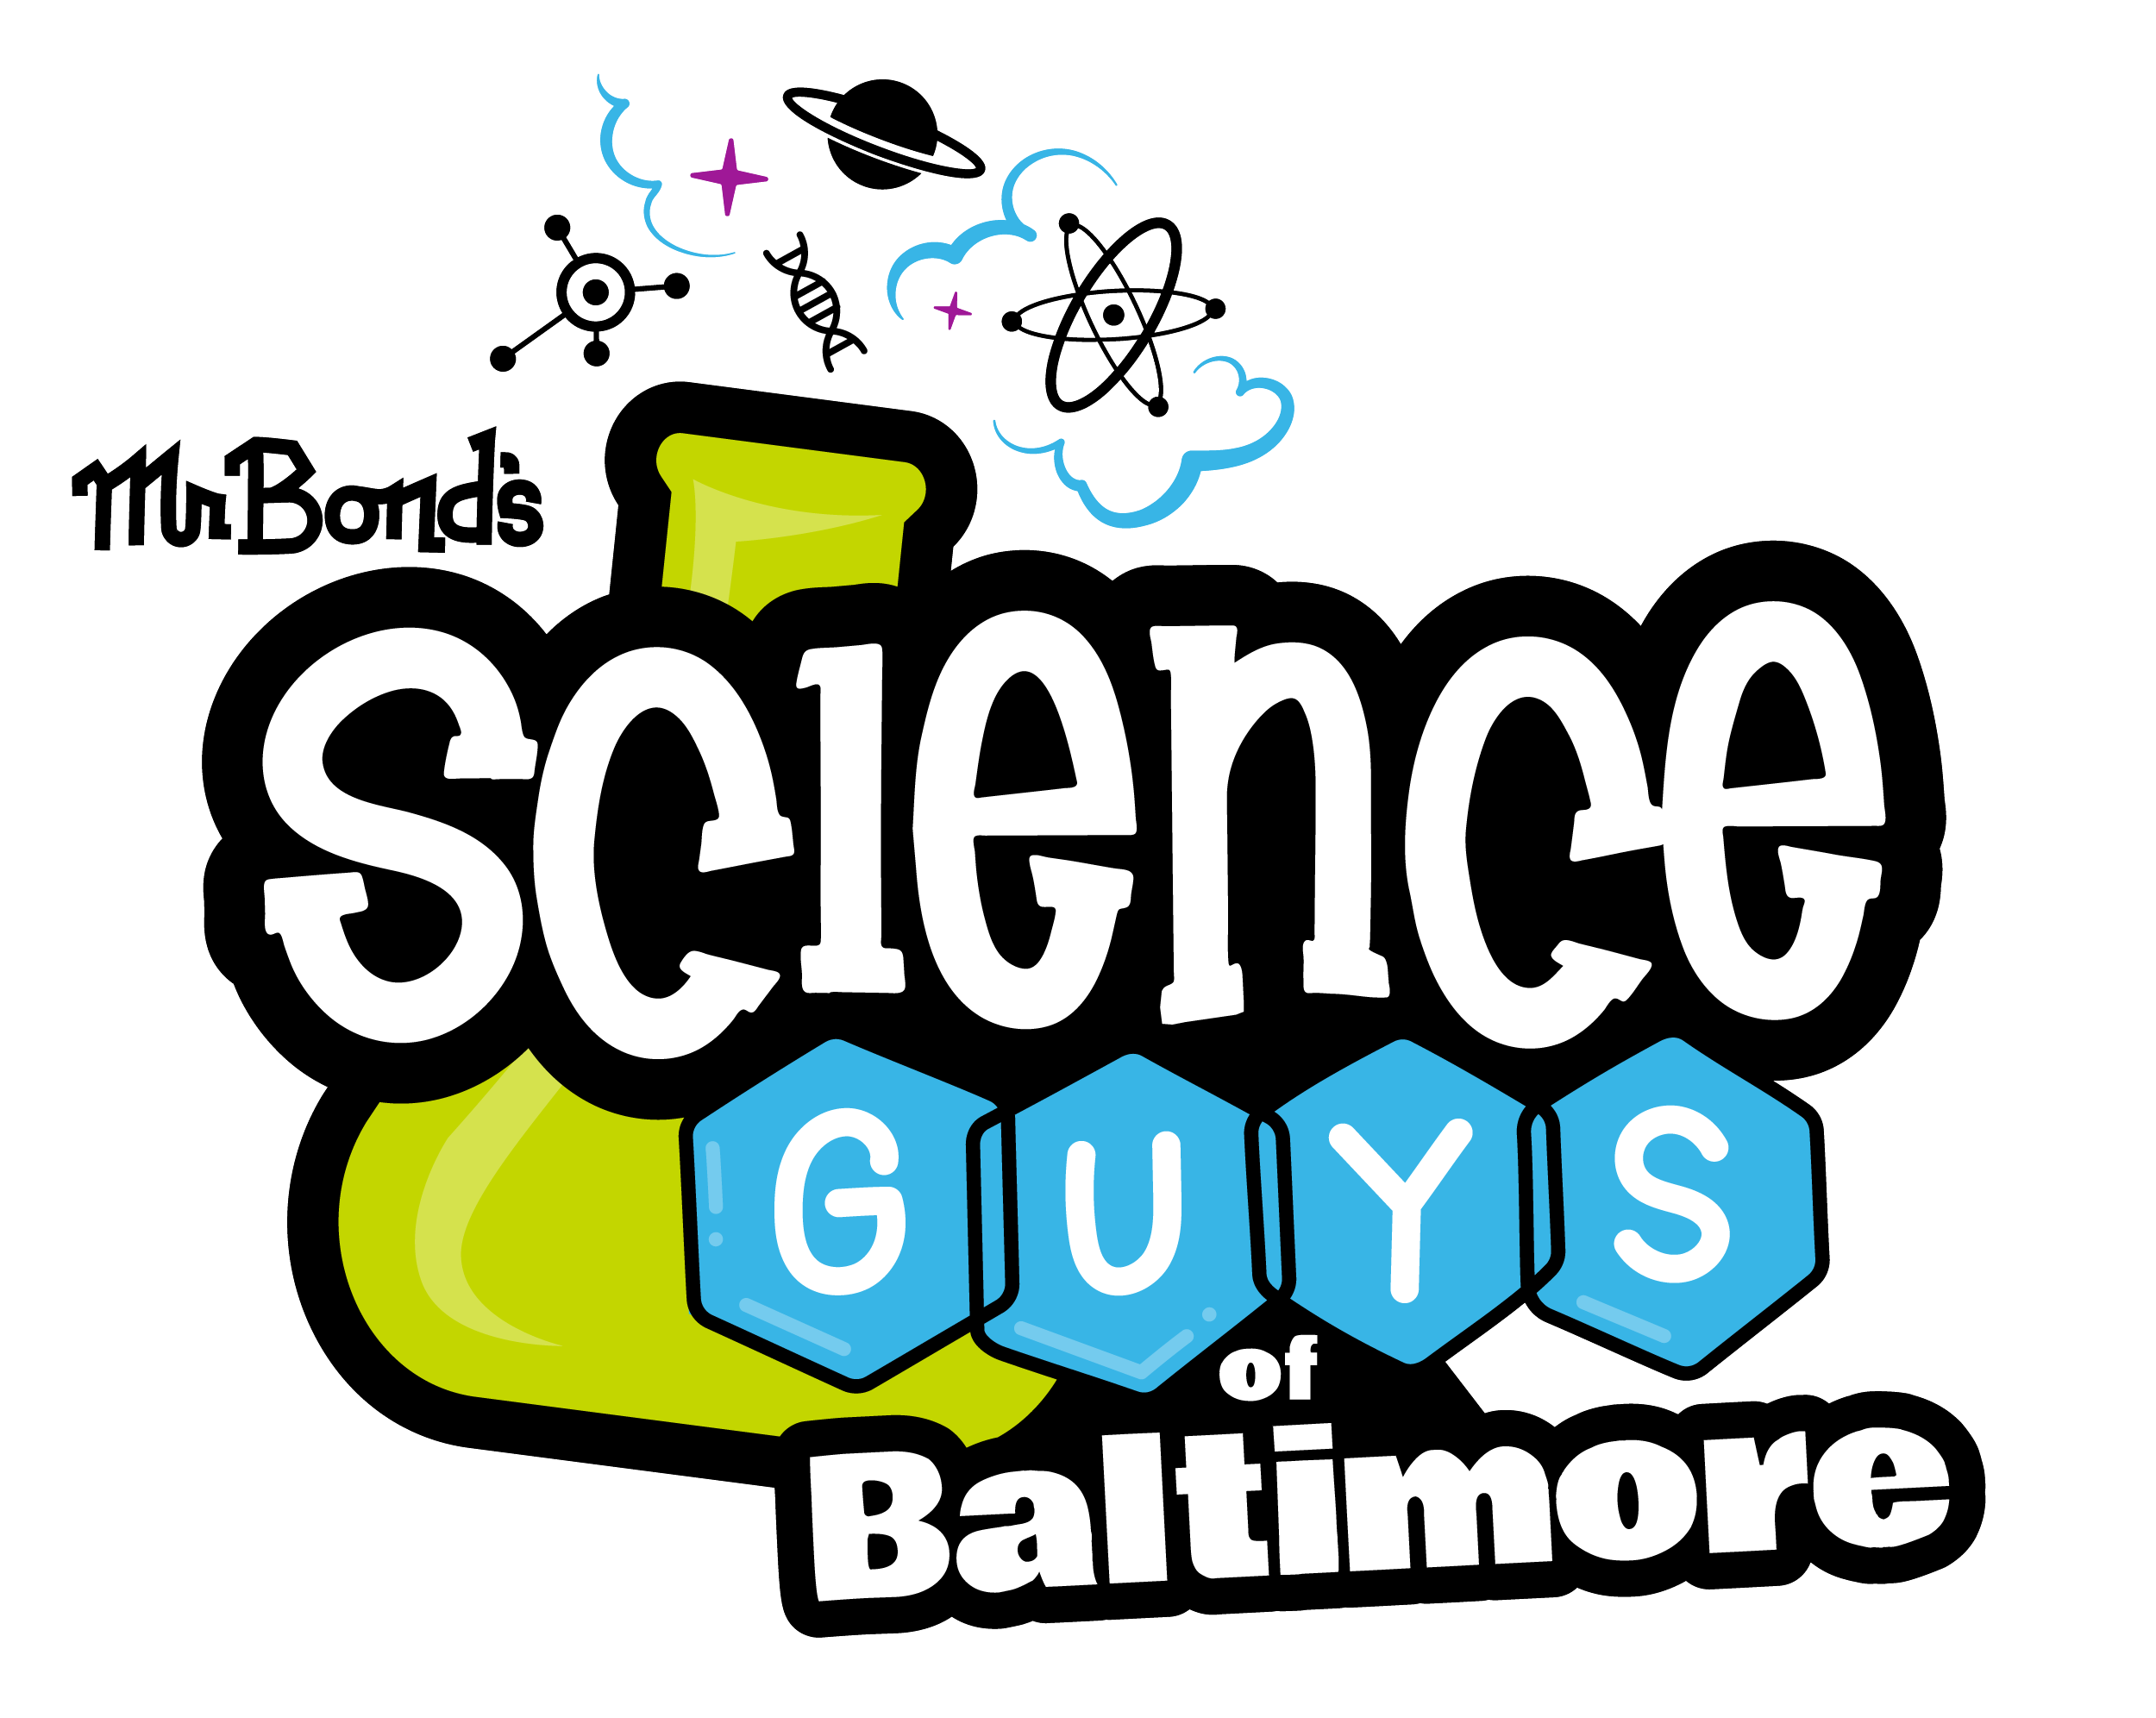 The Science Guys of Baltimore